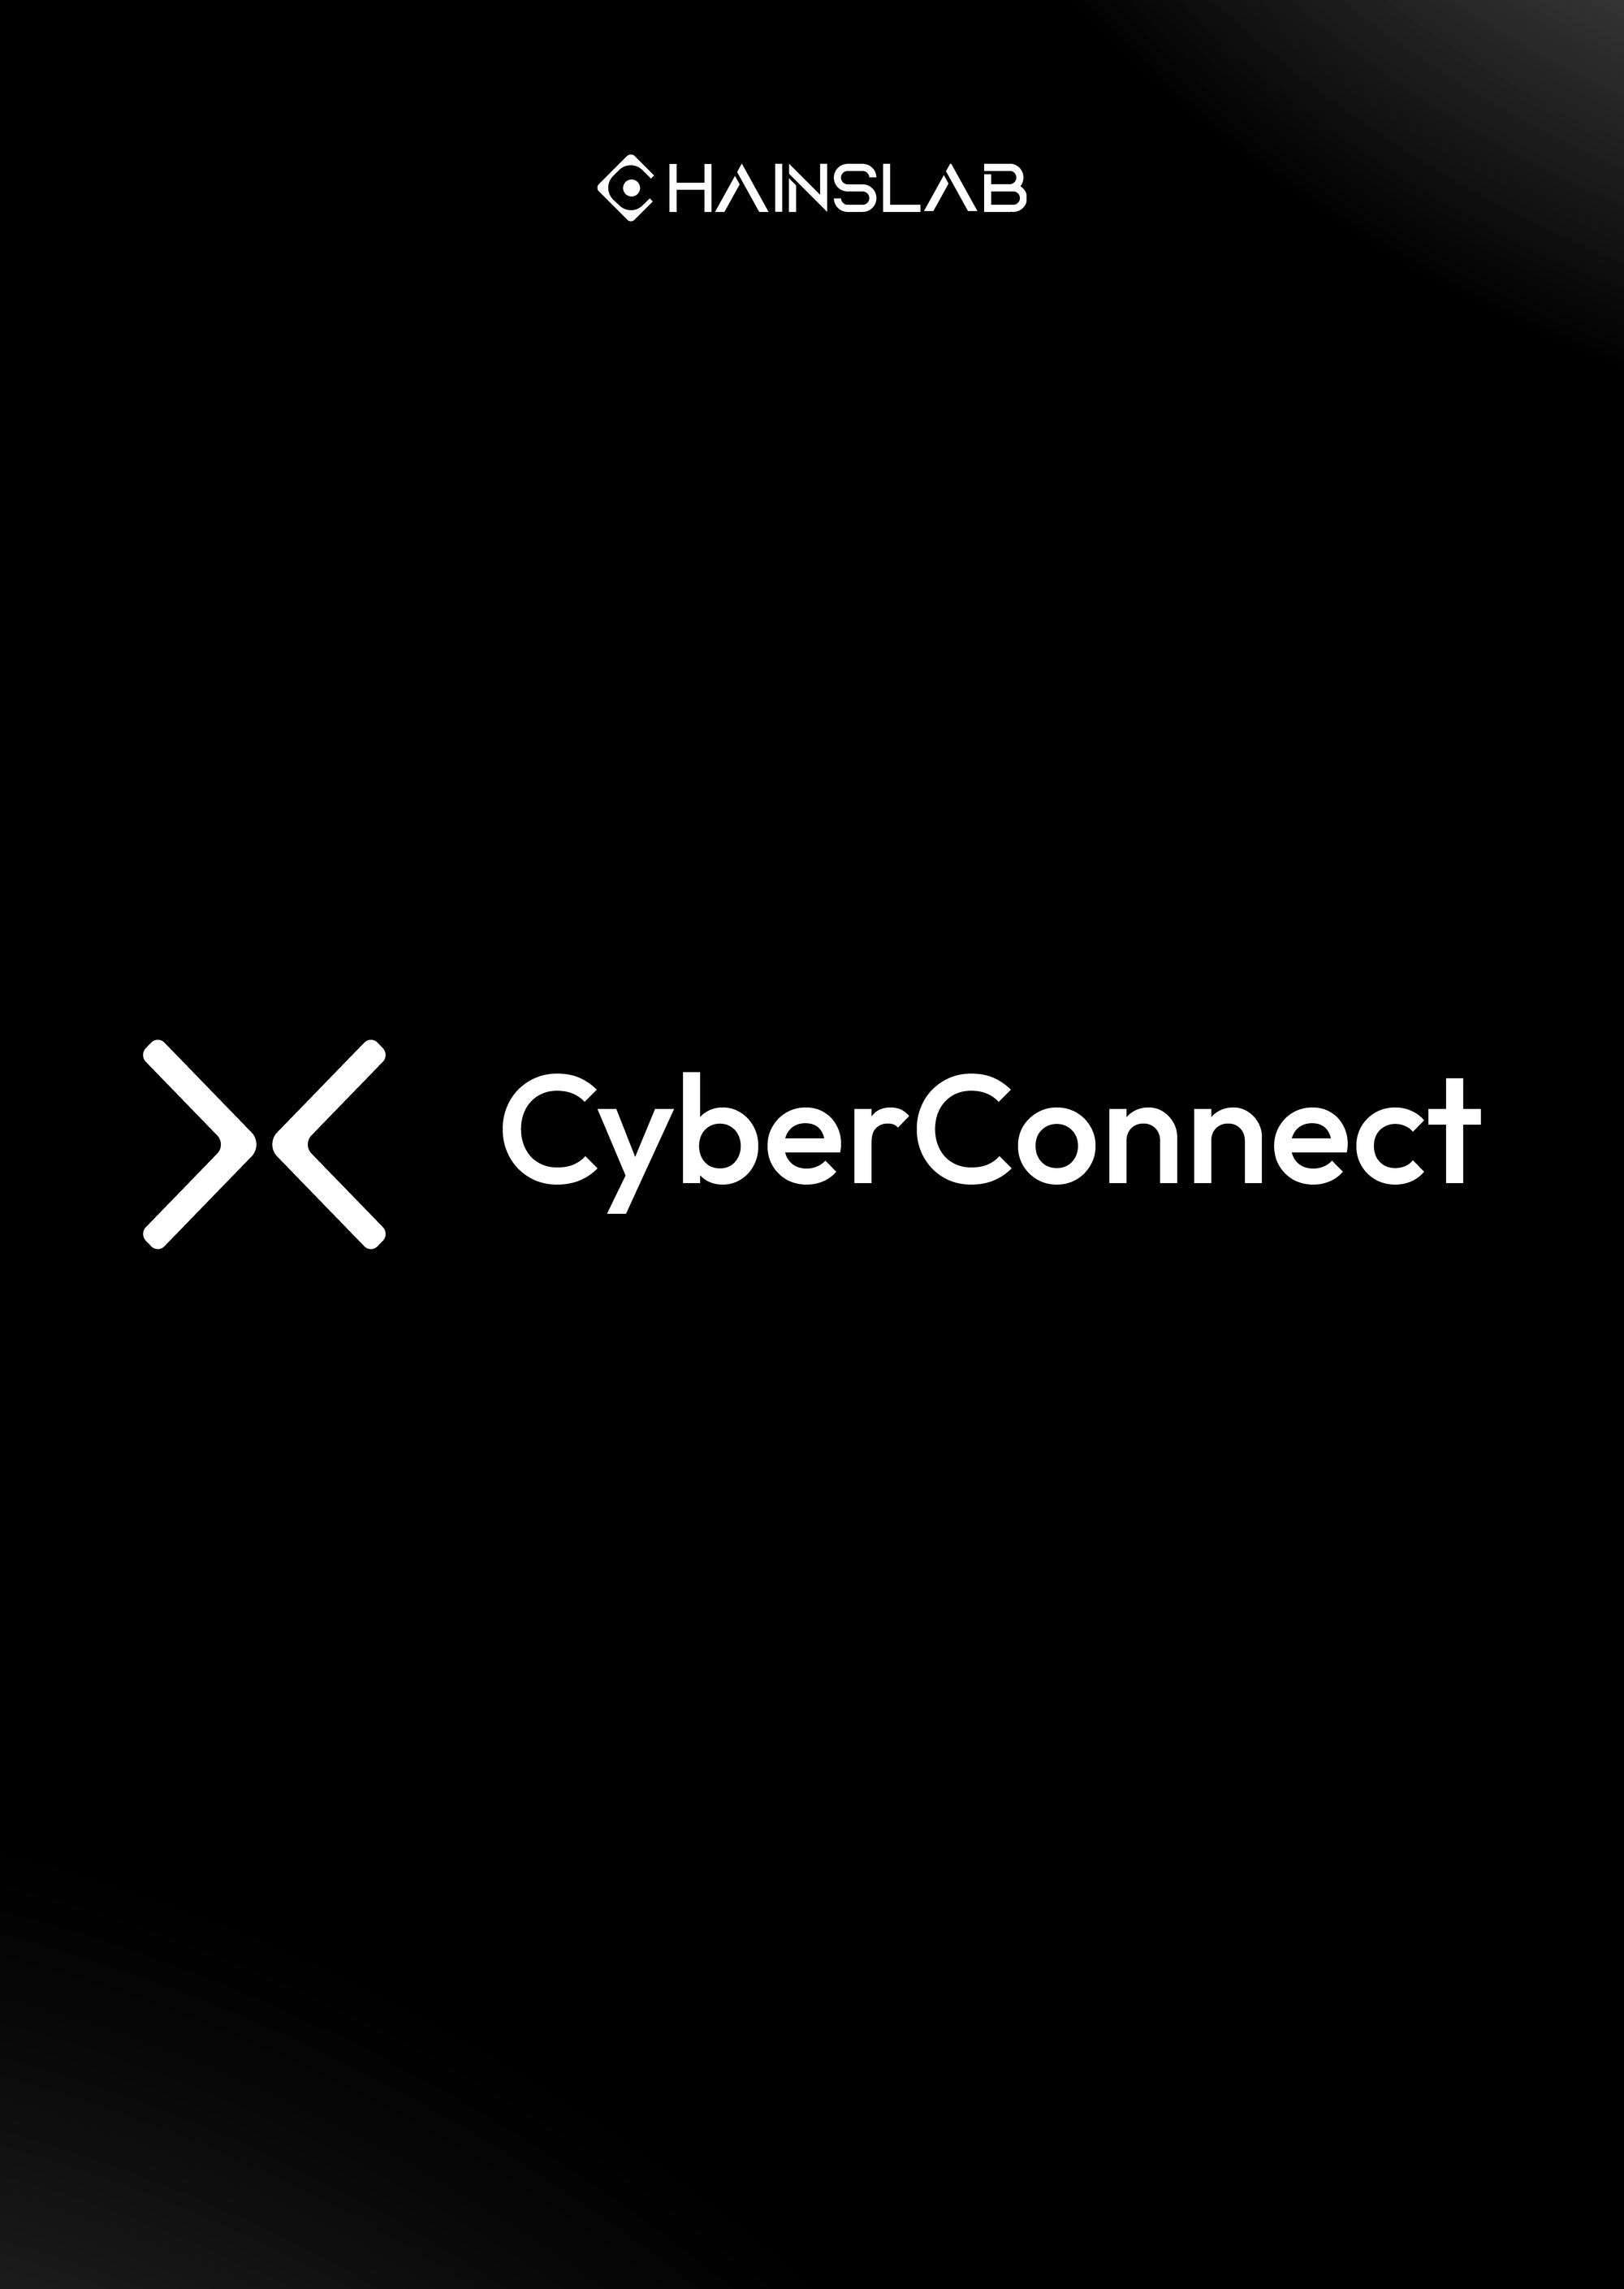 CyberConnect - The future of Web3 Social Networks?